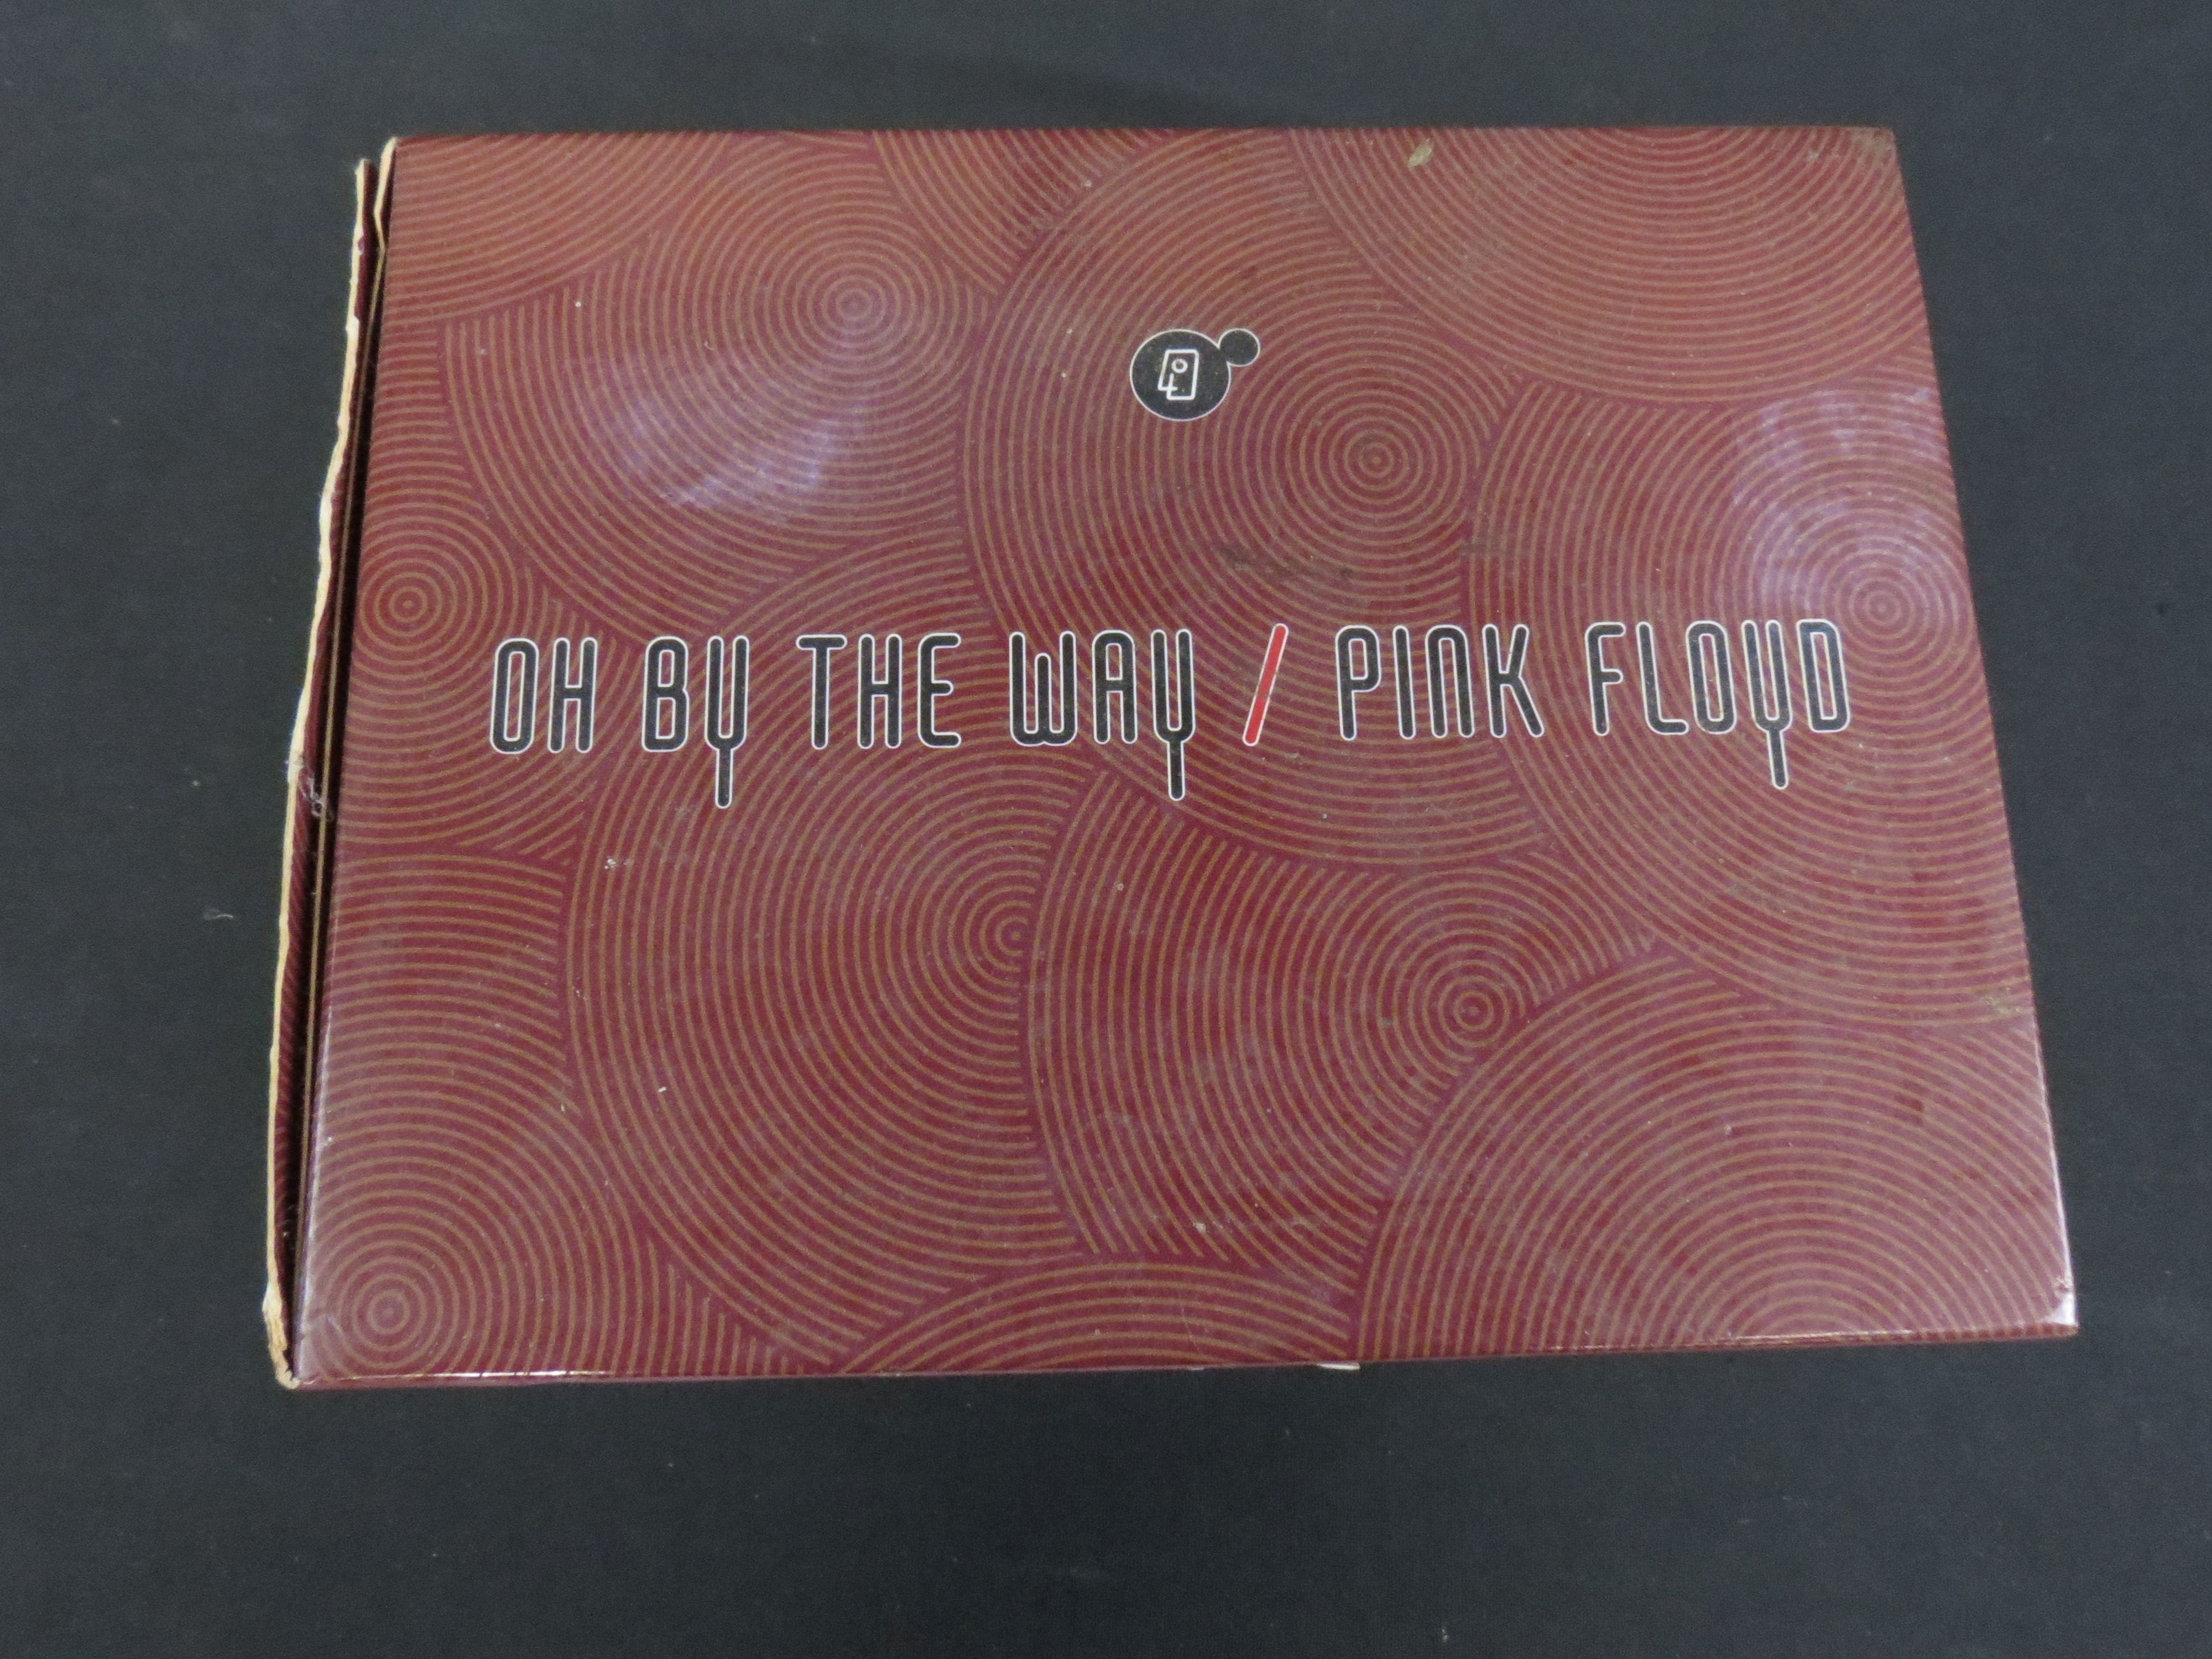 CDs - Pink Floyd Oh By The Way Box Set, complete - Image 5 of 5